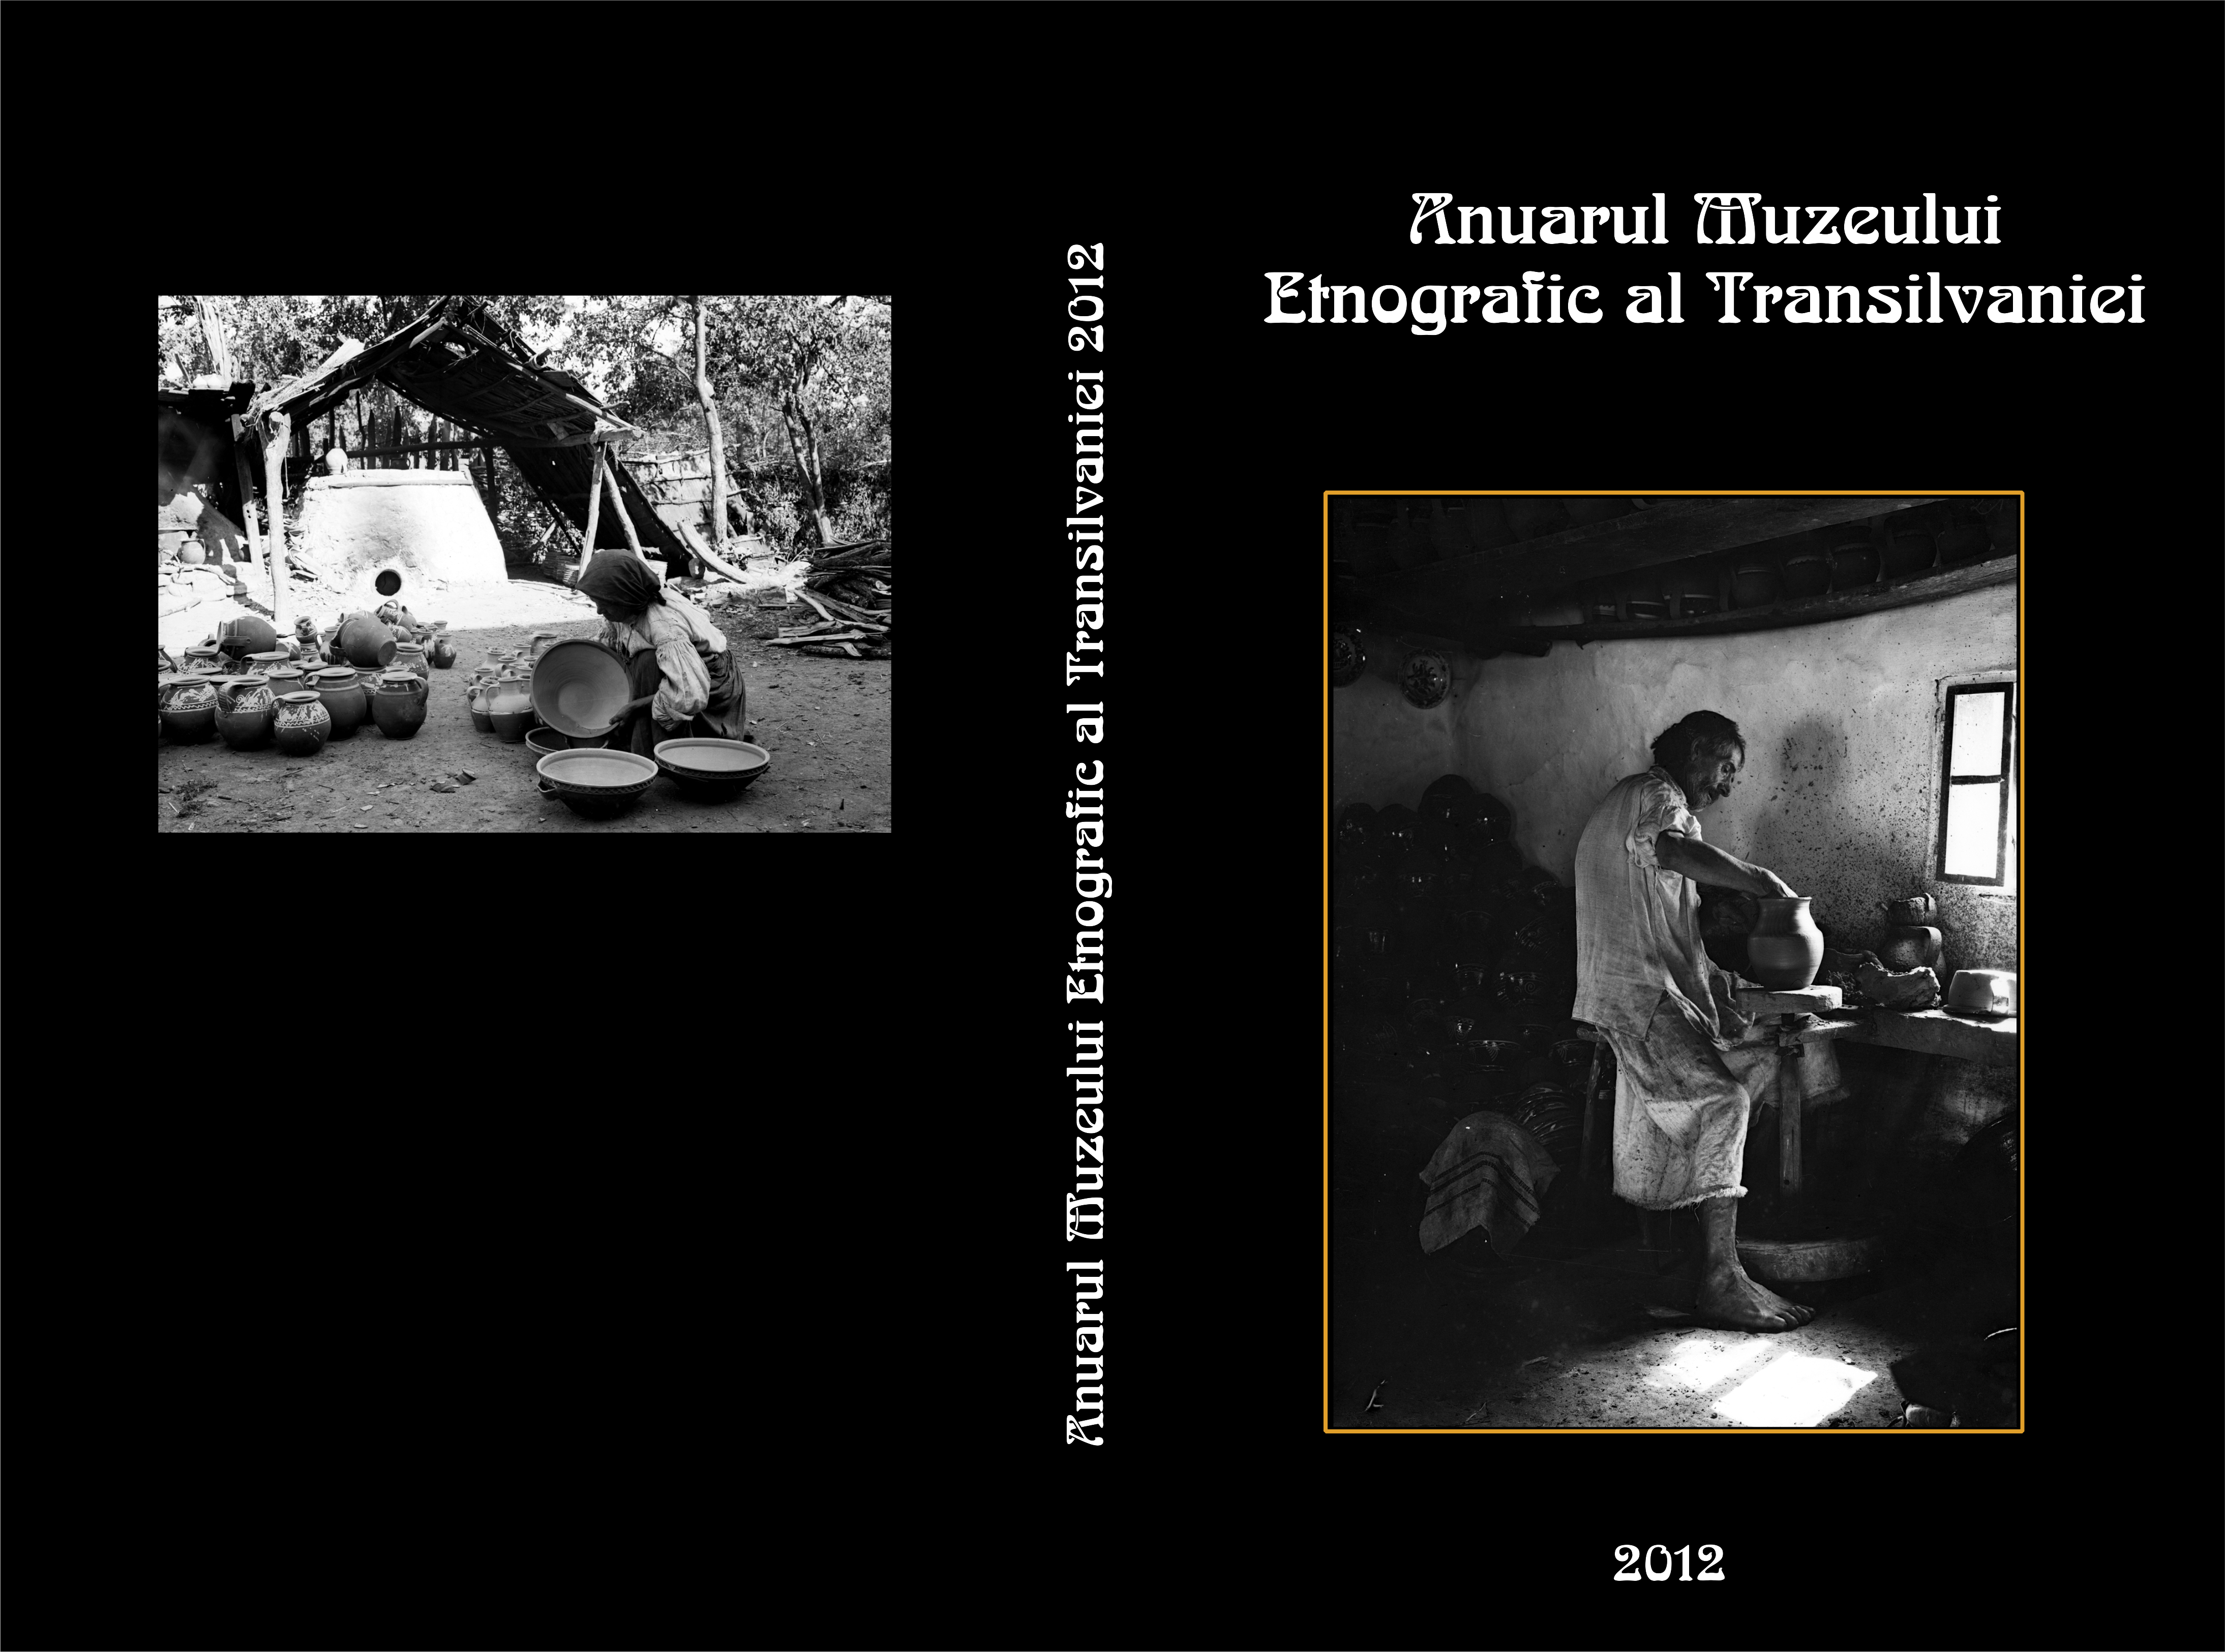 The Pottery Craft in the Photo Archives of the Transylvanian Museum of Ethnography. Cover Image